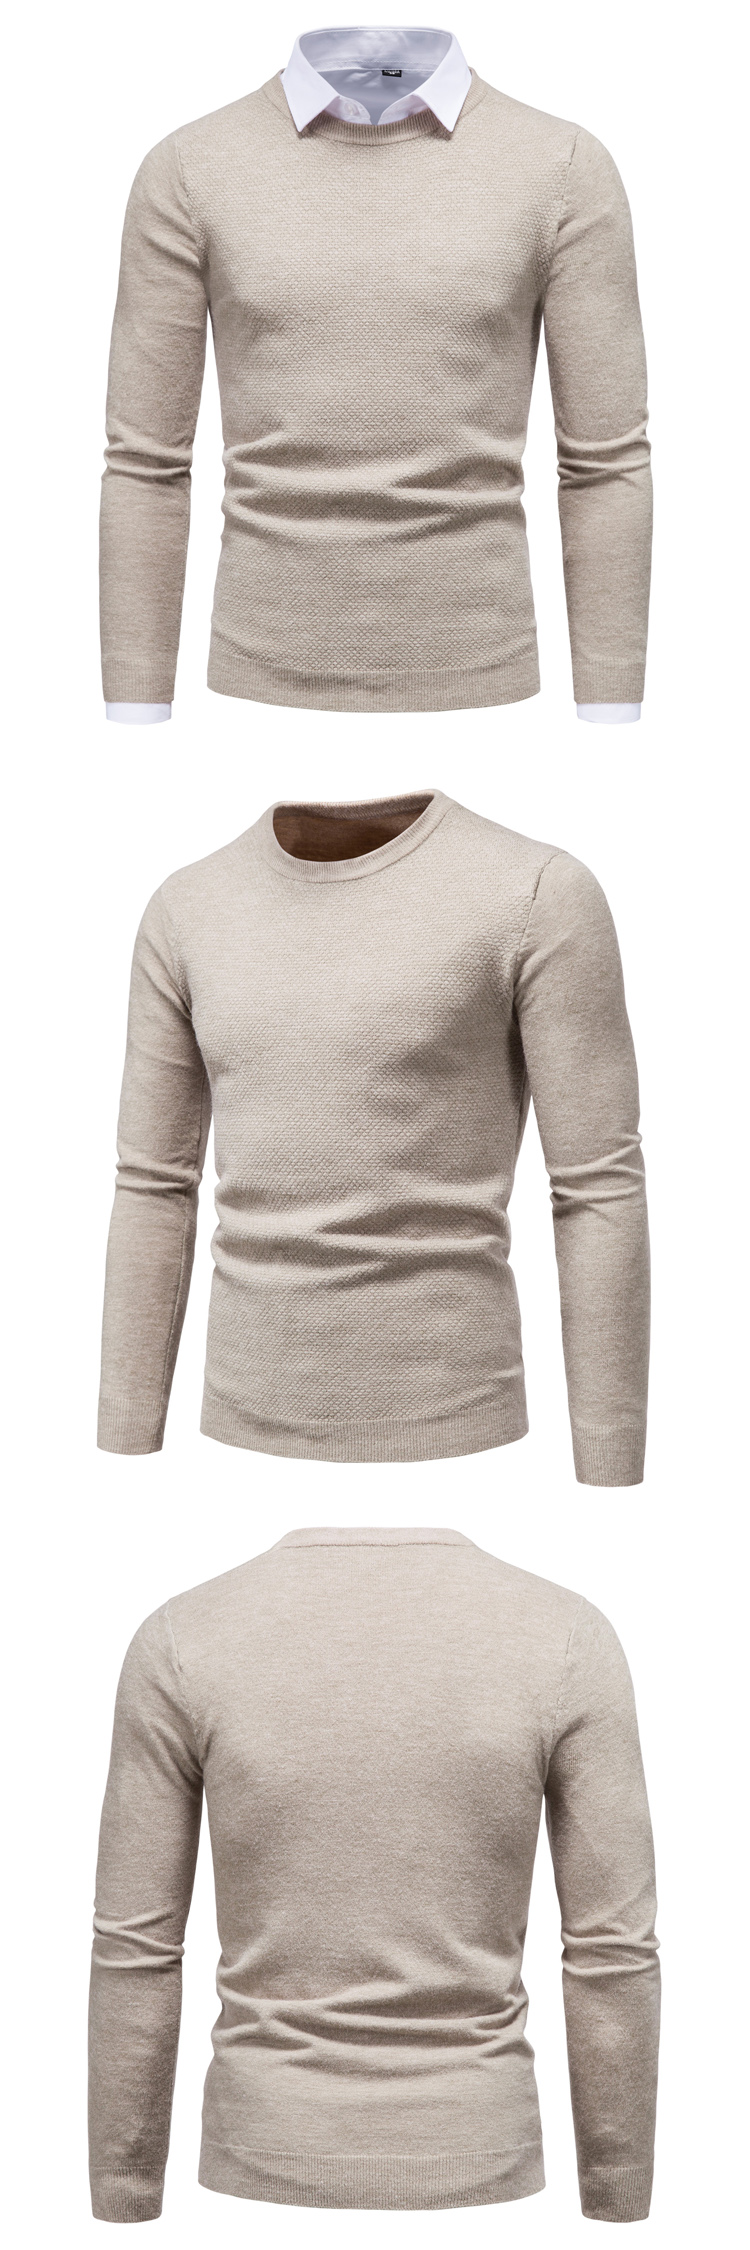 New-Autumn-Winter-Men-Round-Neck-Sweater-Mens-Warm-Knitting-Pullover-Sweaters-Ca